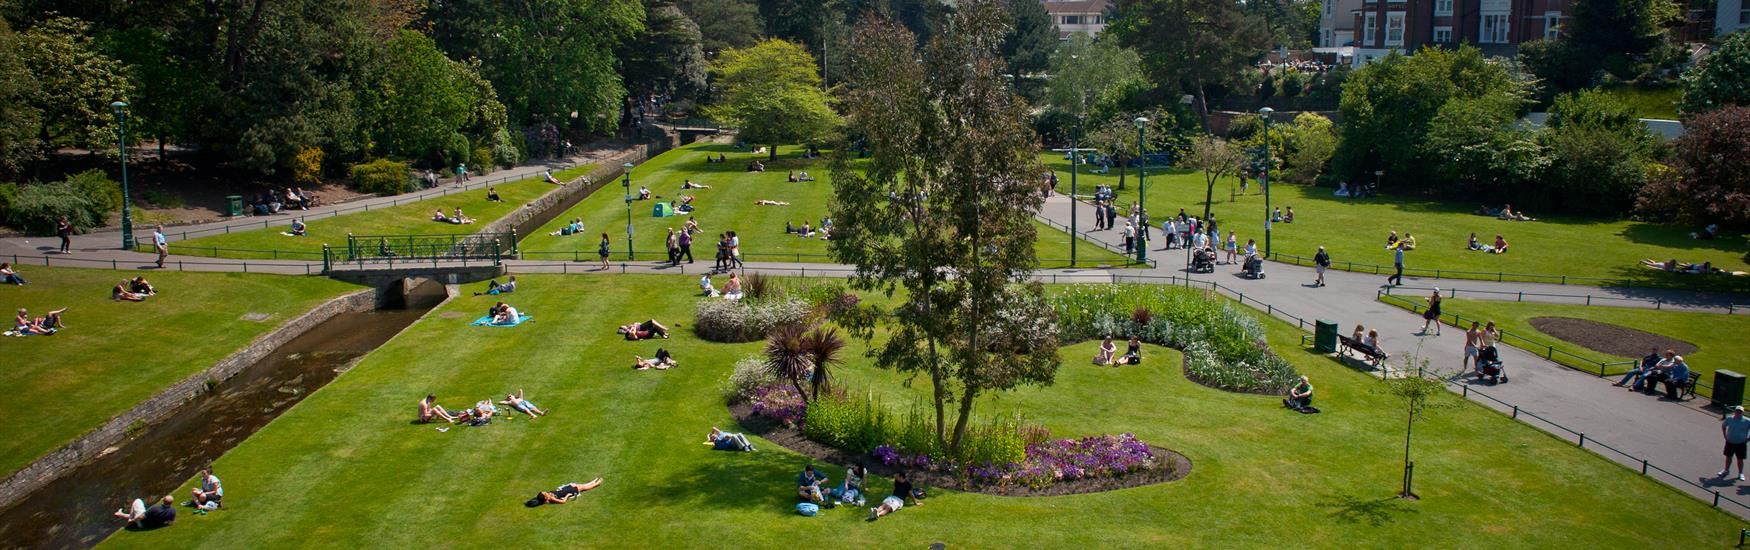 Wide shot of people sitting on the grass enjoying warm sunny weather